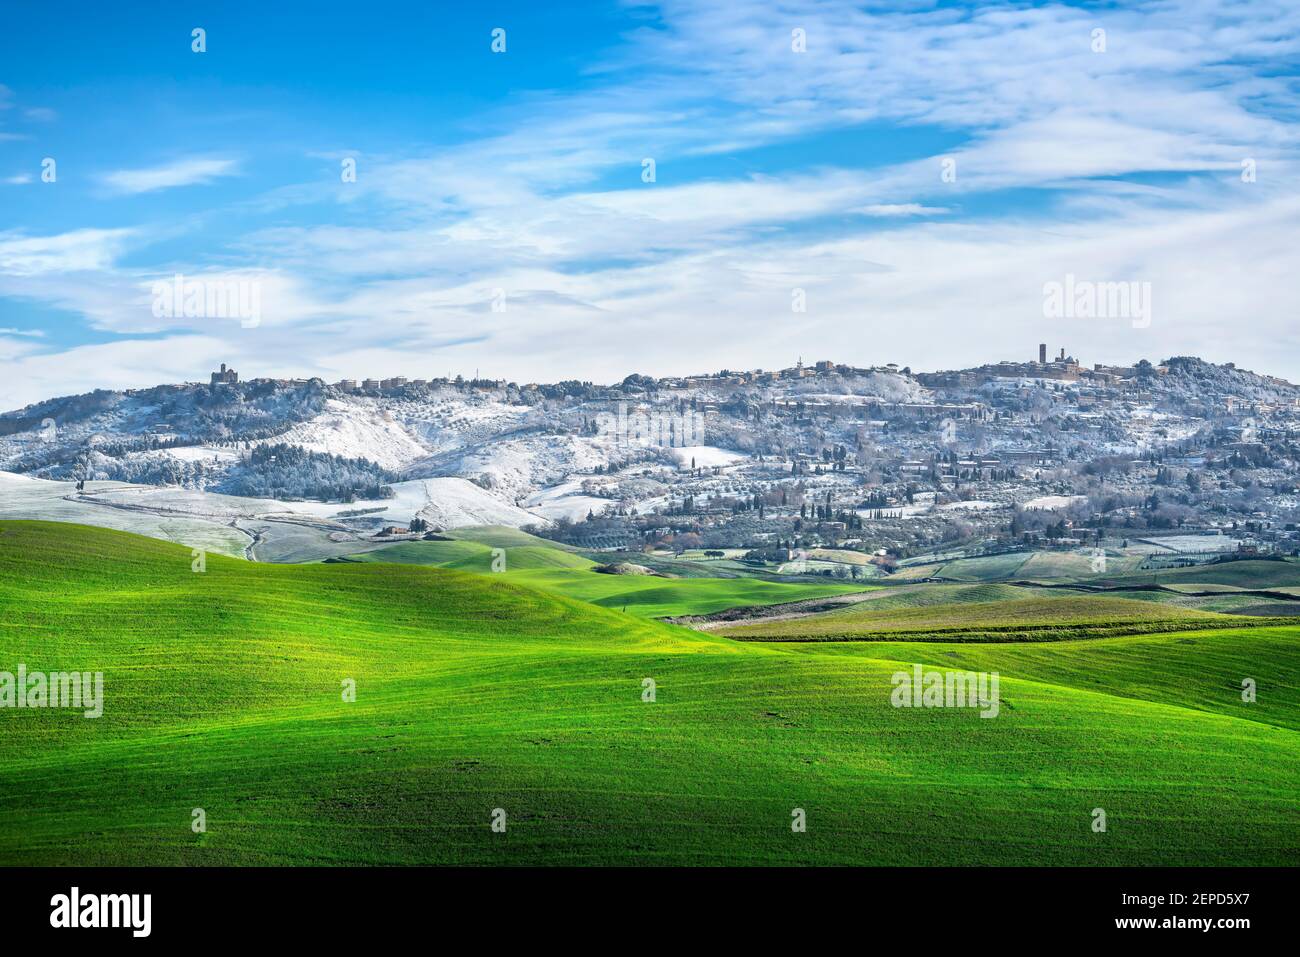 Volterra snowy town and rolling hills in winter. Pisa province, Tuscany, Italy, Europe. Stock Photo